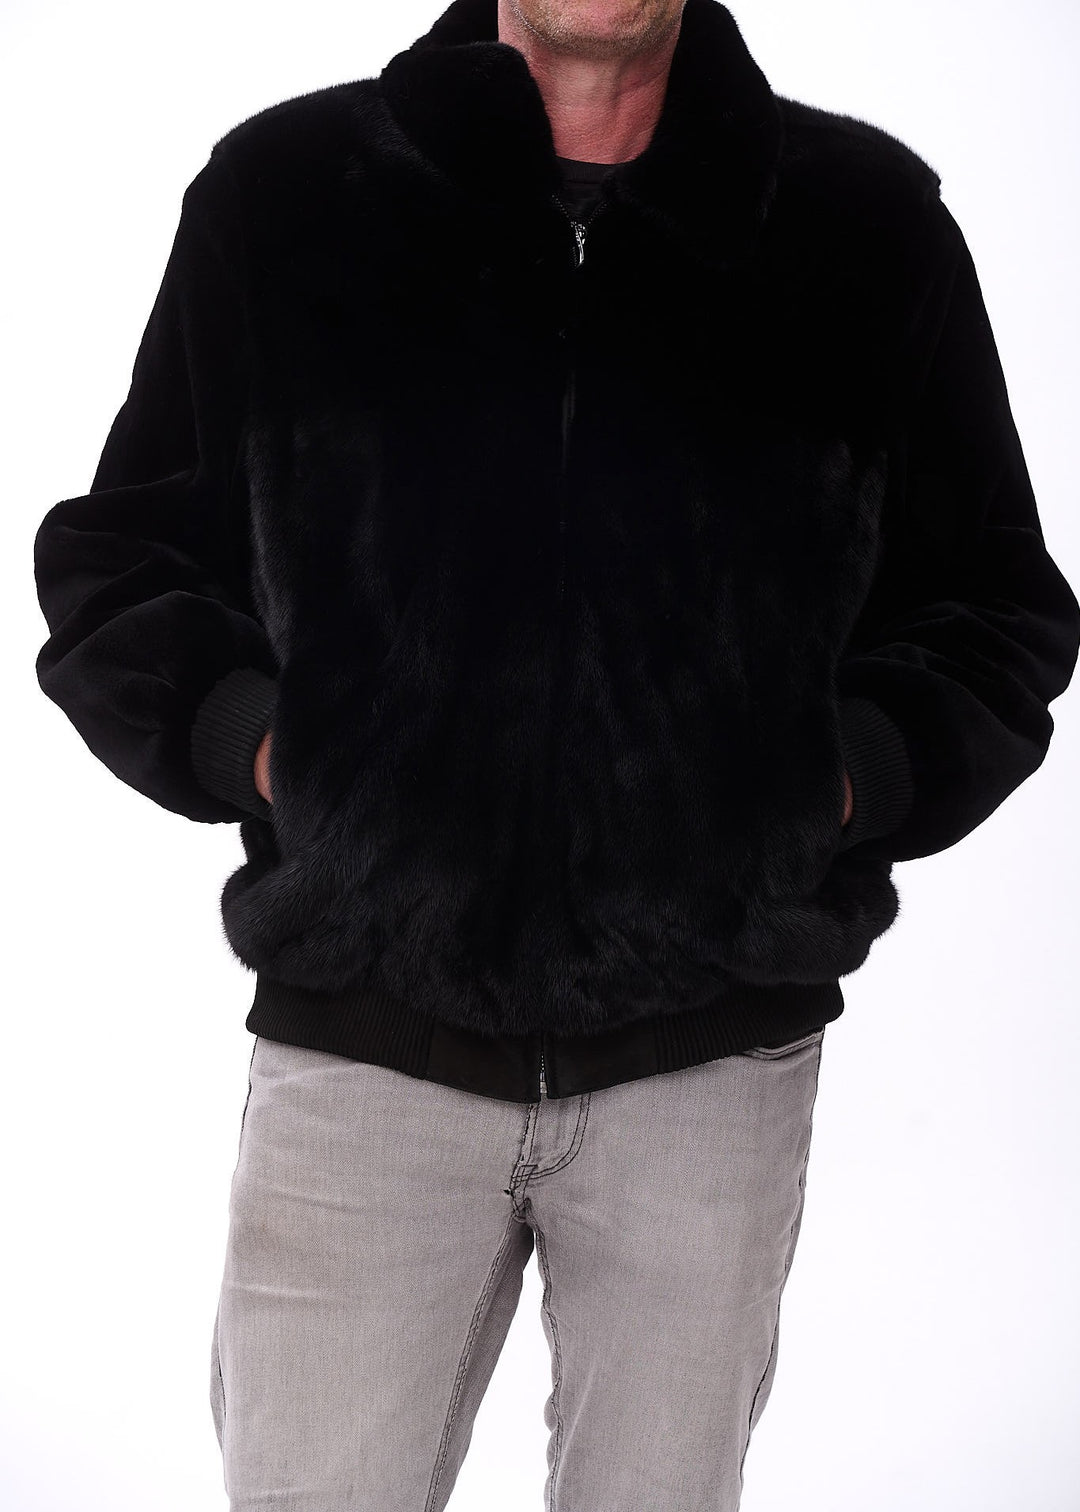 Men's bomber jacket with sheared mink